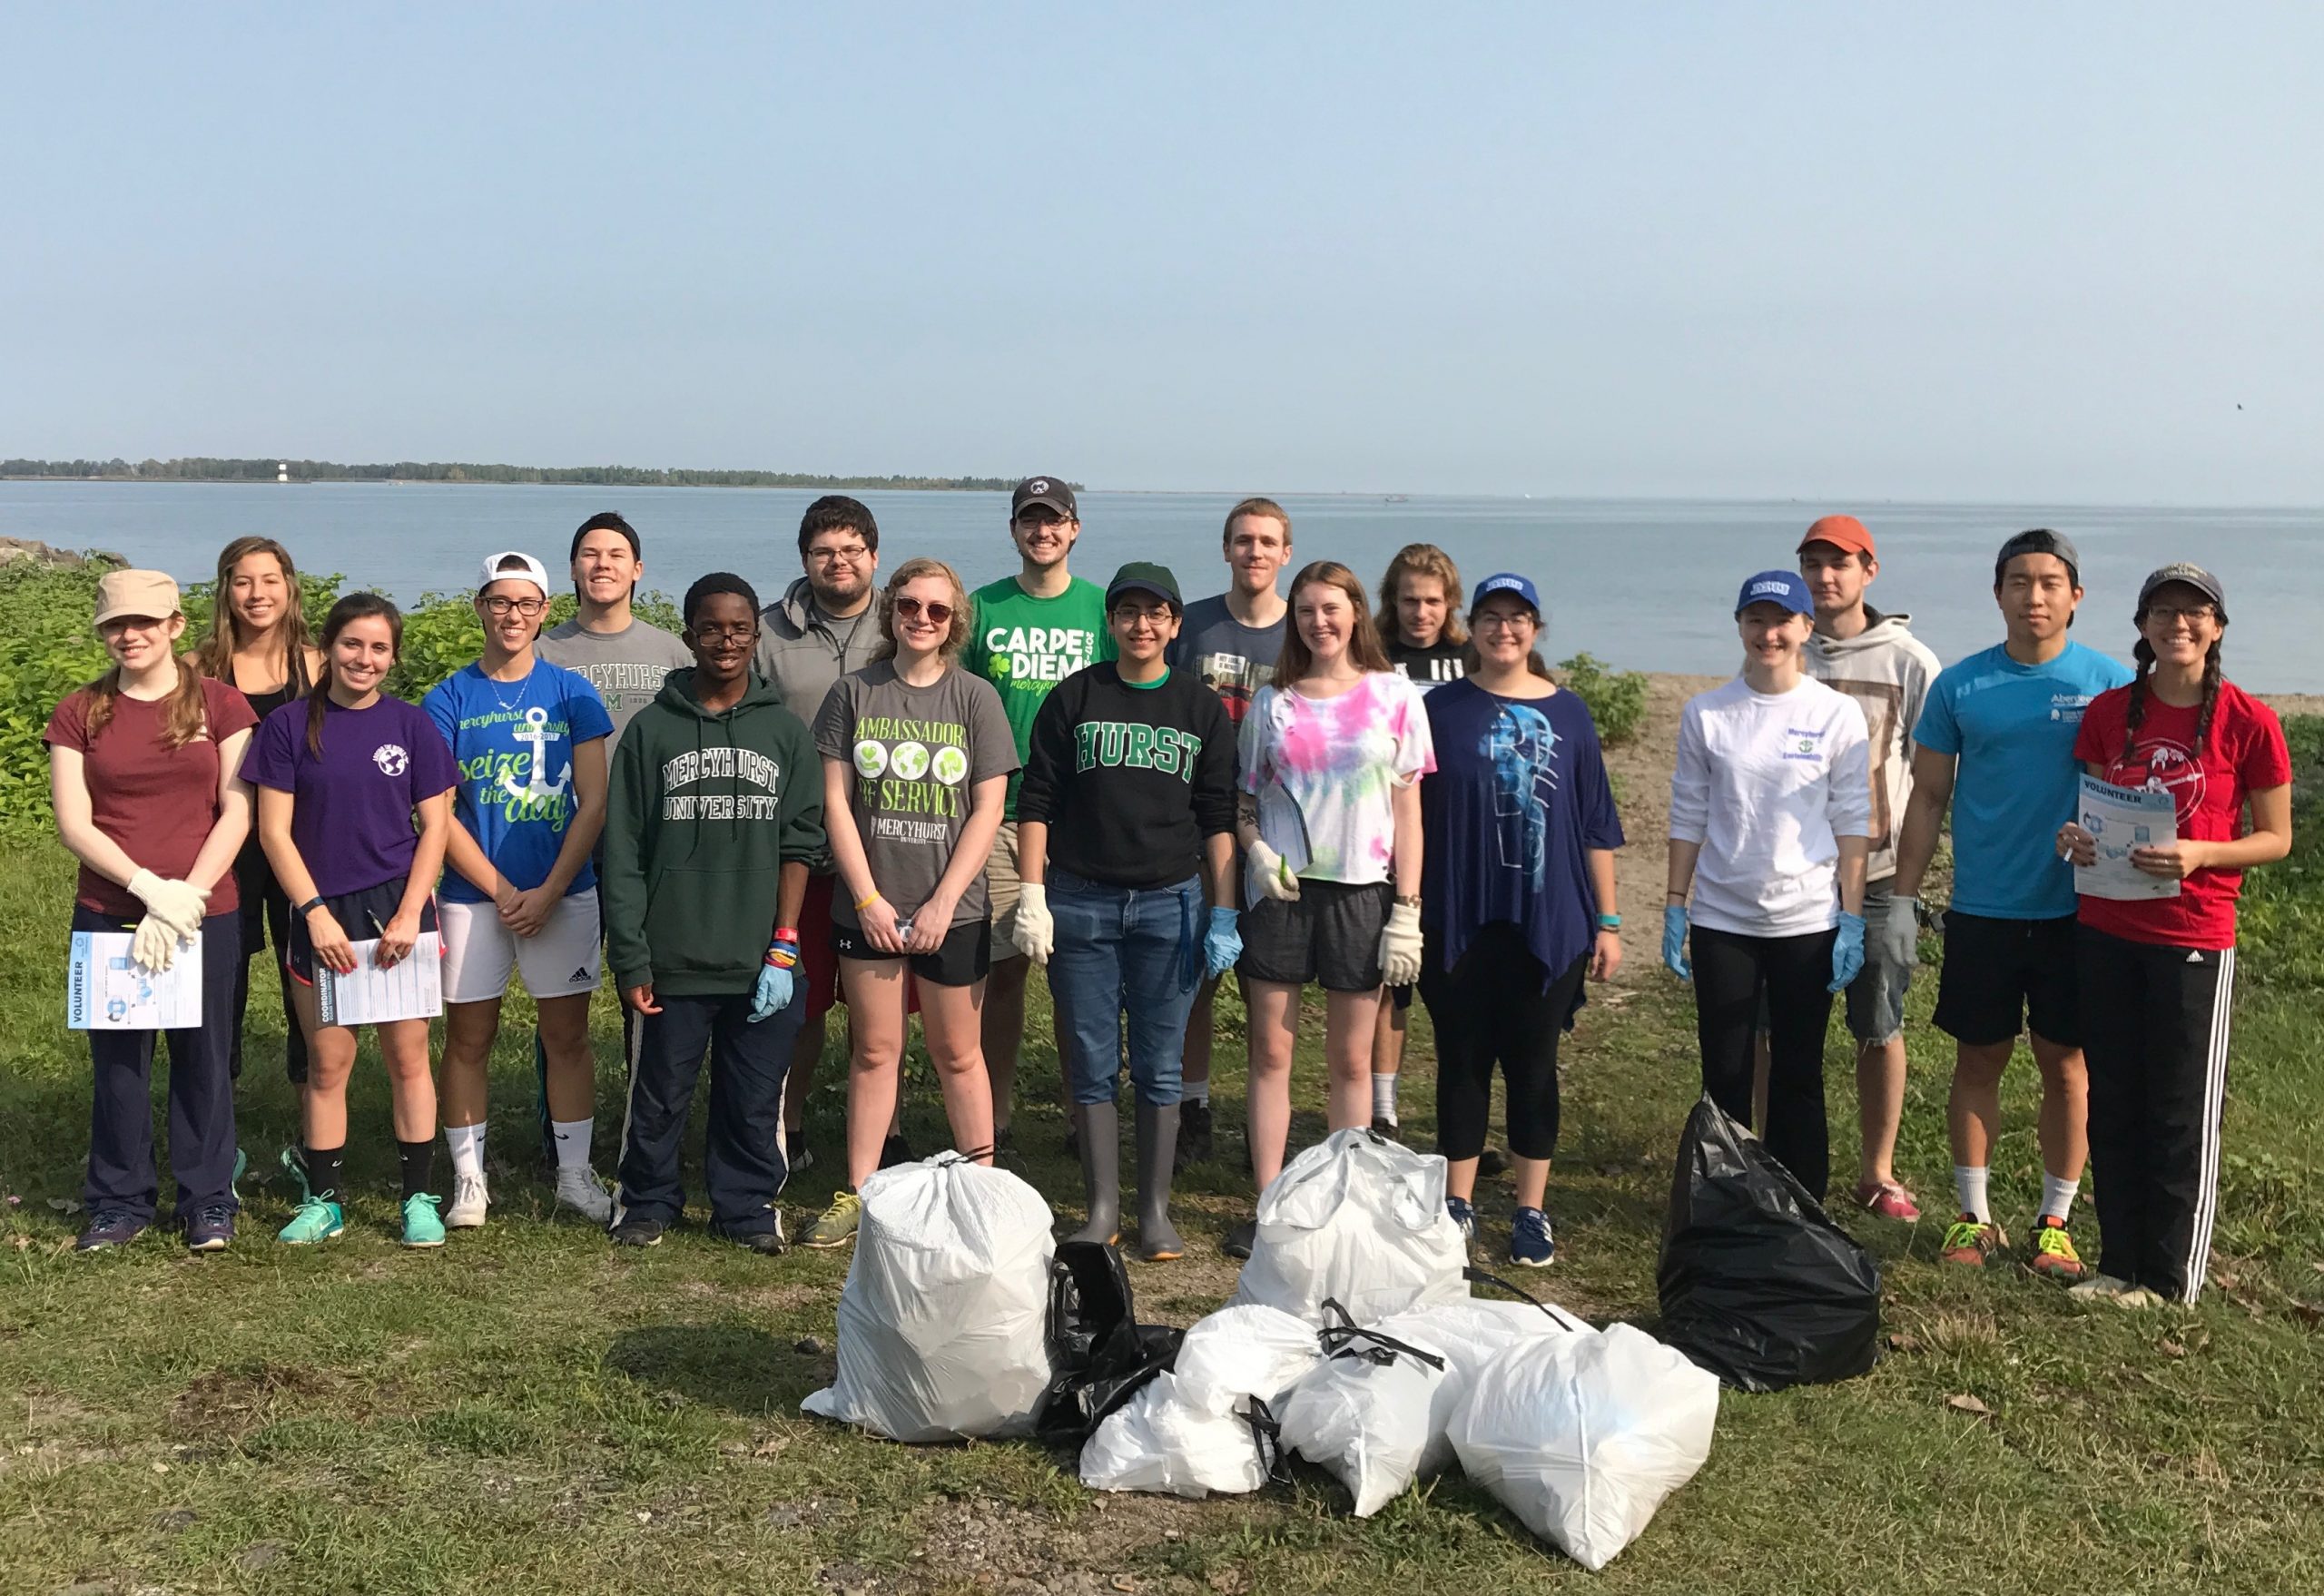 Student volunteers from Mercyhurst University with the garbage they cleaned up from the East Avenue Boat Launch in Erie, Pennsylvania, during International Coastal Cleanup. Pictured from left to right: Carly La Riviere, Katie Reisinger, Emily Morabeto, Odie Enslen, Cole Prots, Collin Davis, Steven Martz, Meghan Maker, Christian Copper, Ashley Espinoza, Logan Floyd, Marina Boyle, Paul Cohen, Michelle Benedetti, Jenna Uhlig, Jordan Sigmond, Jason Huang, and Angelea Belfiore.